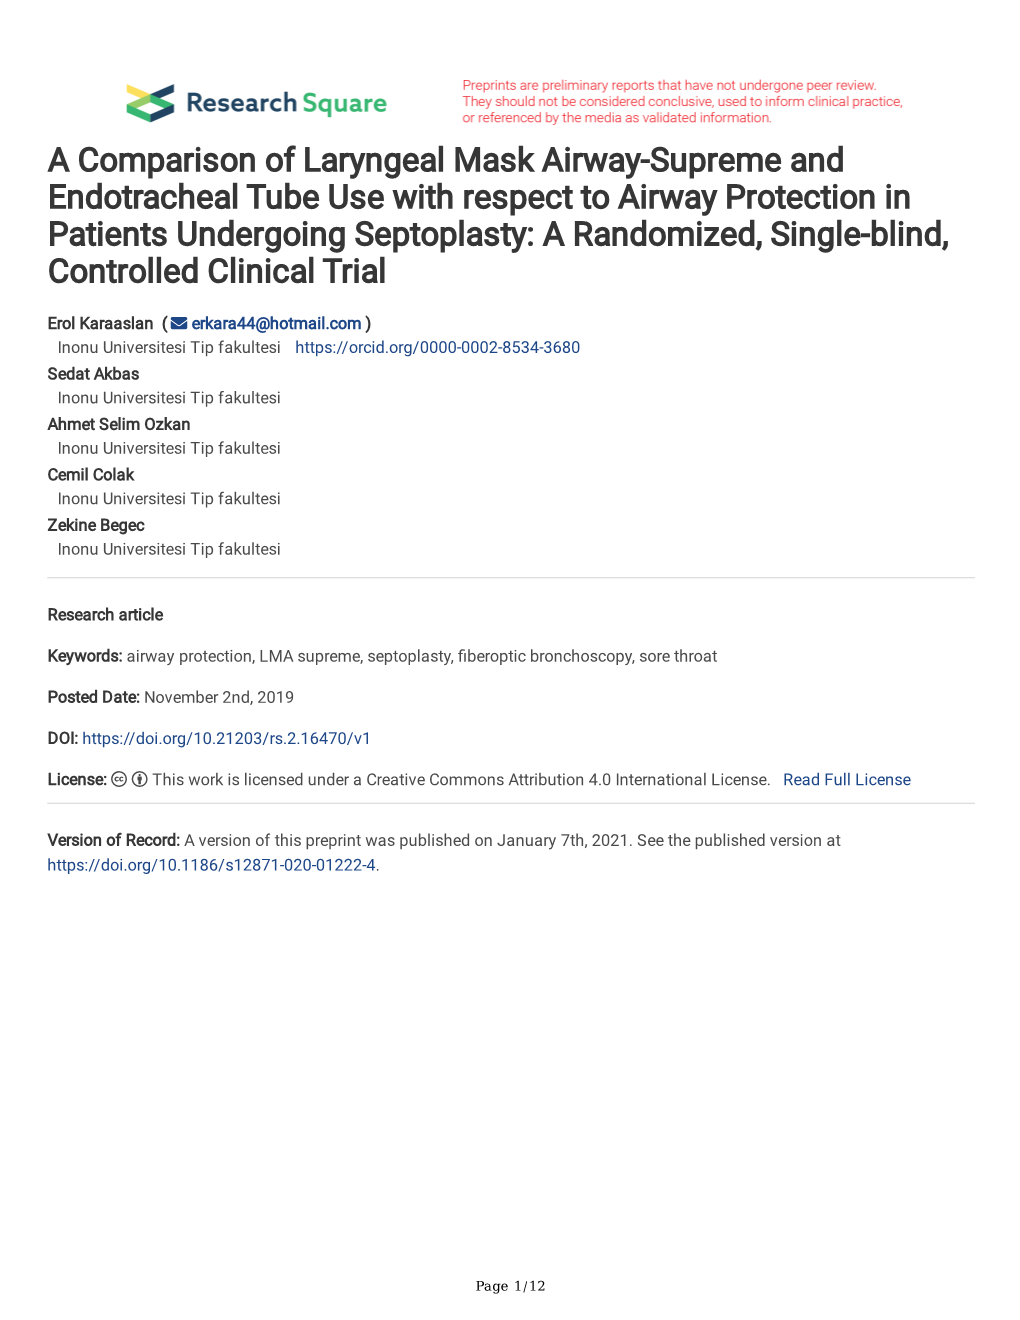 A Comparison of Laryngeal Mask Airway-Supreme and Endotracheal